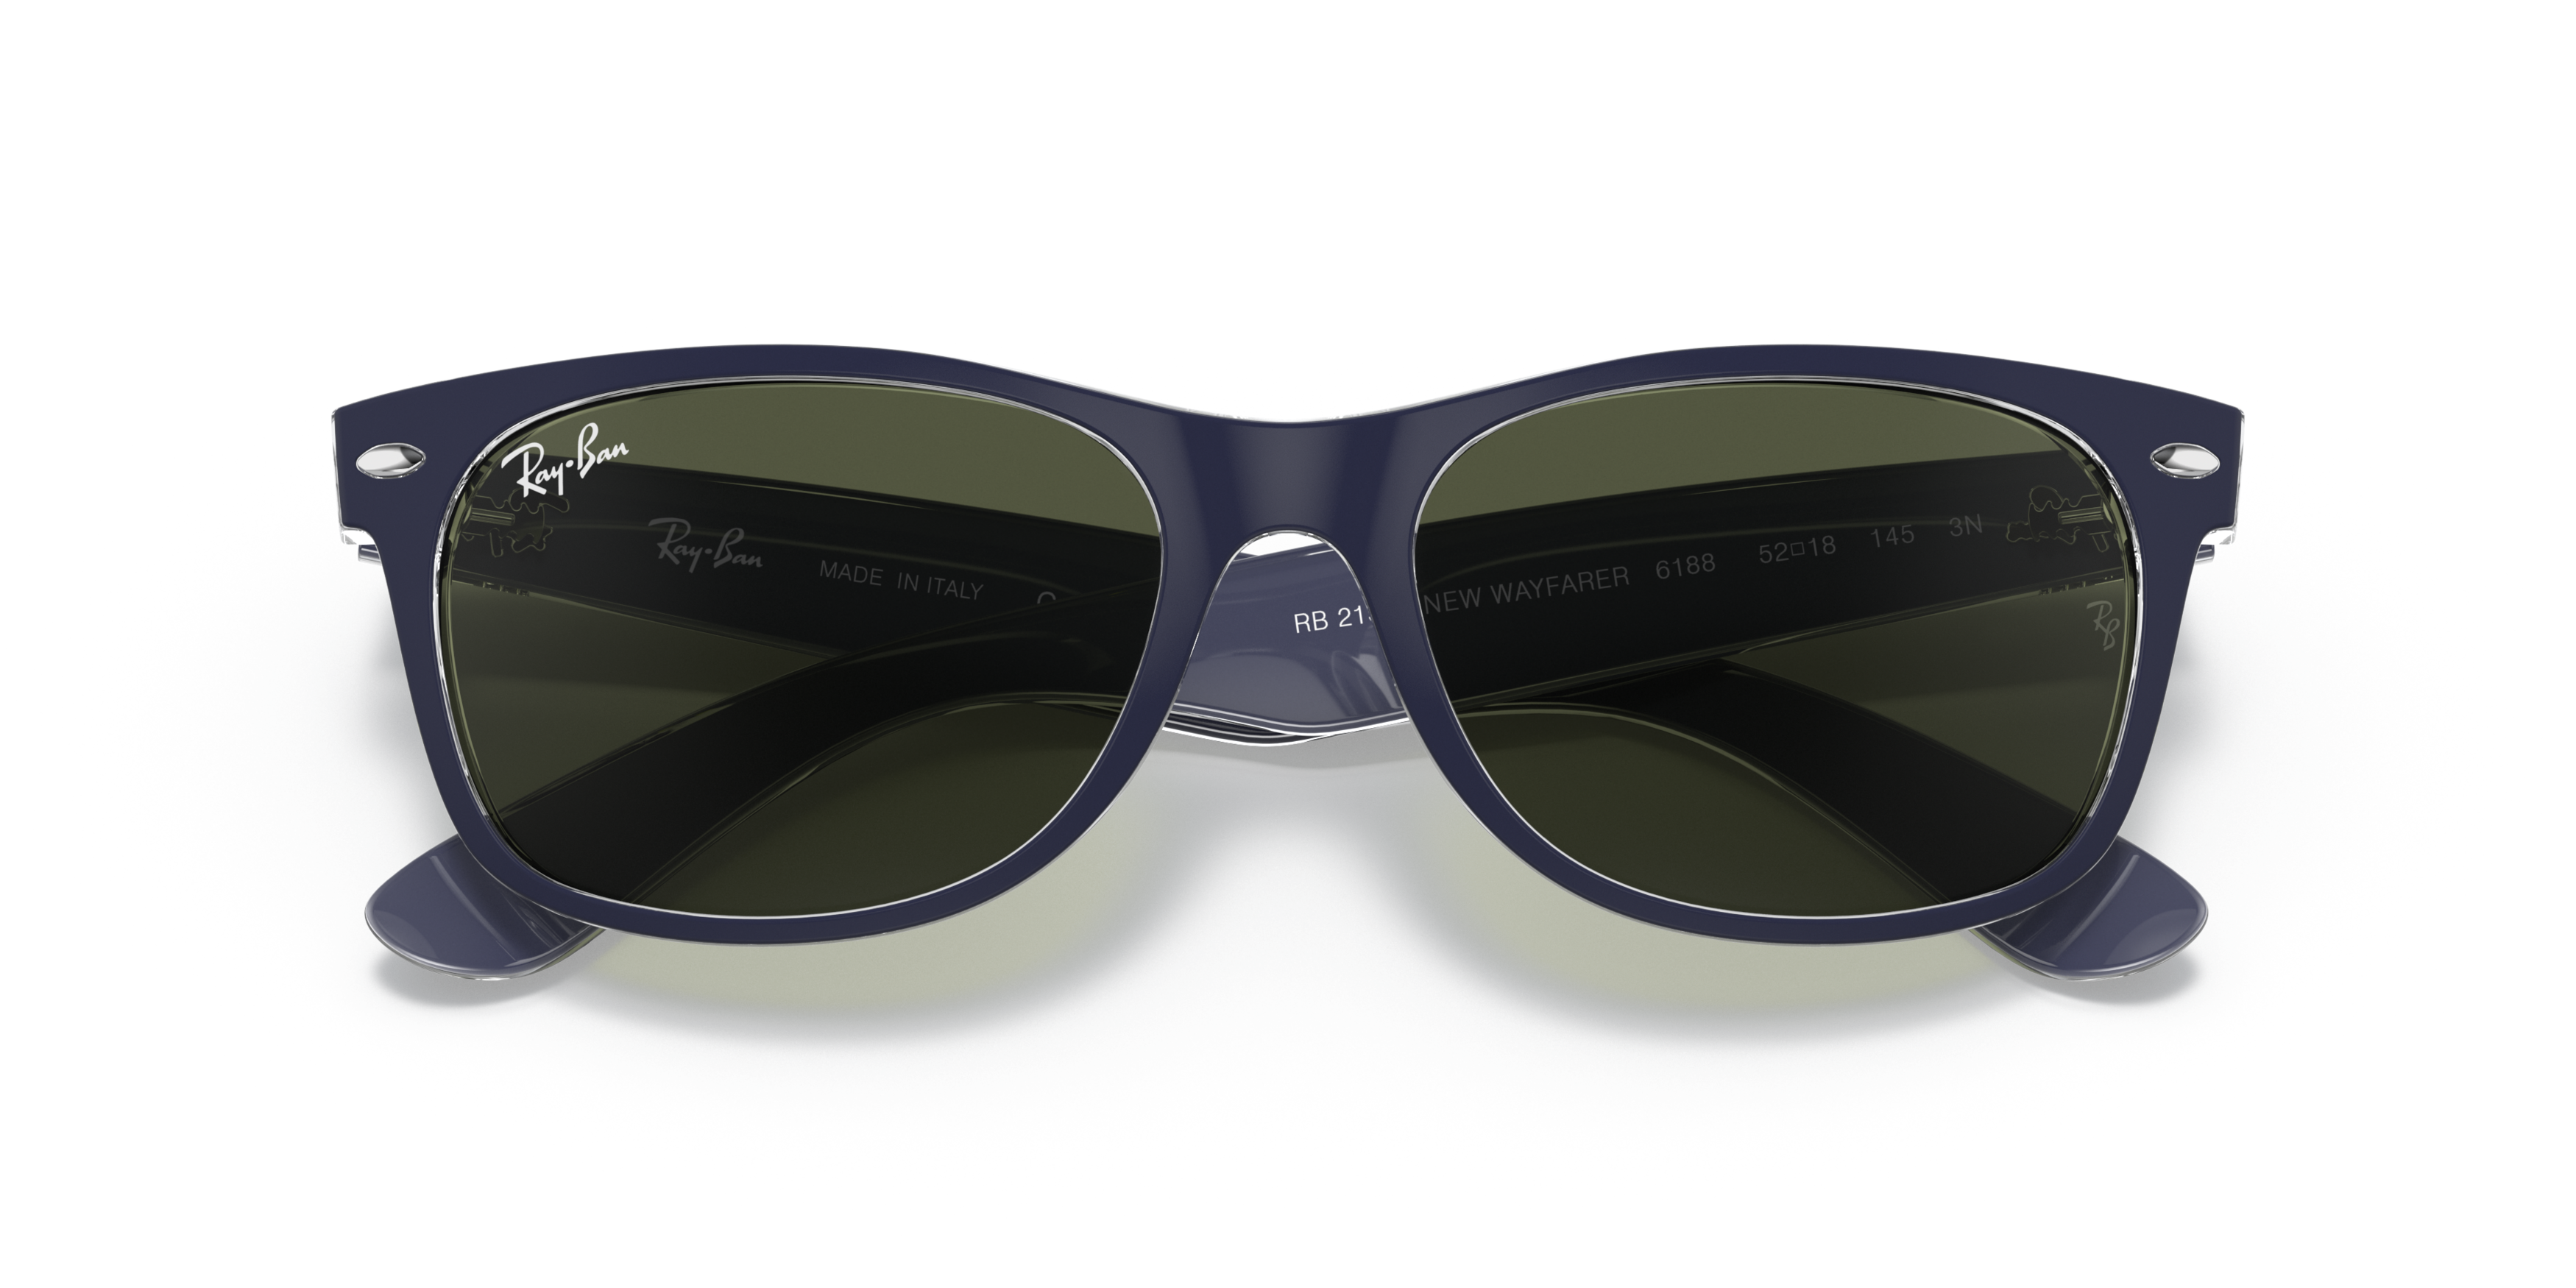 [products.image.folded] Ray-Ban New Wayfarer Bicolor RB2132 6188